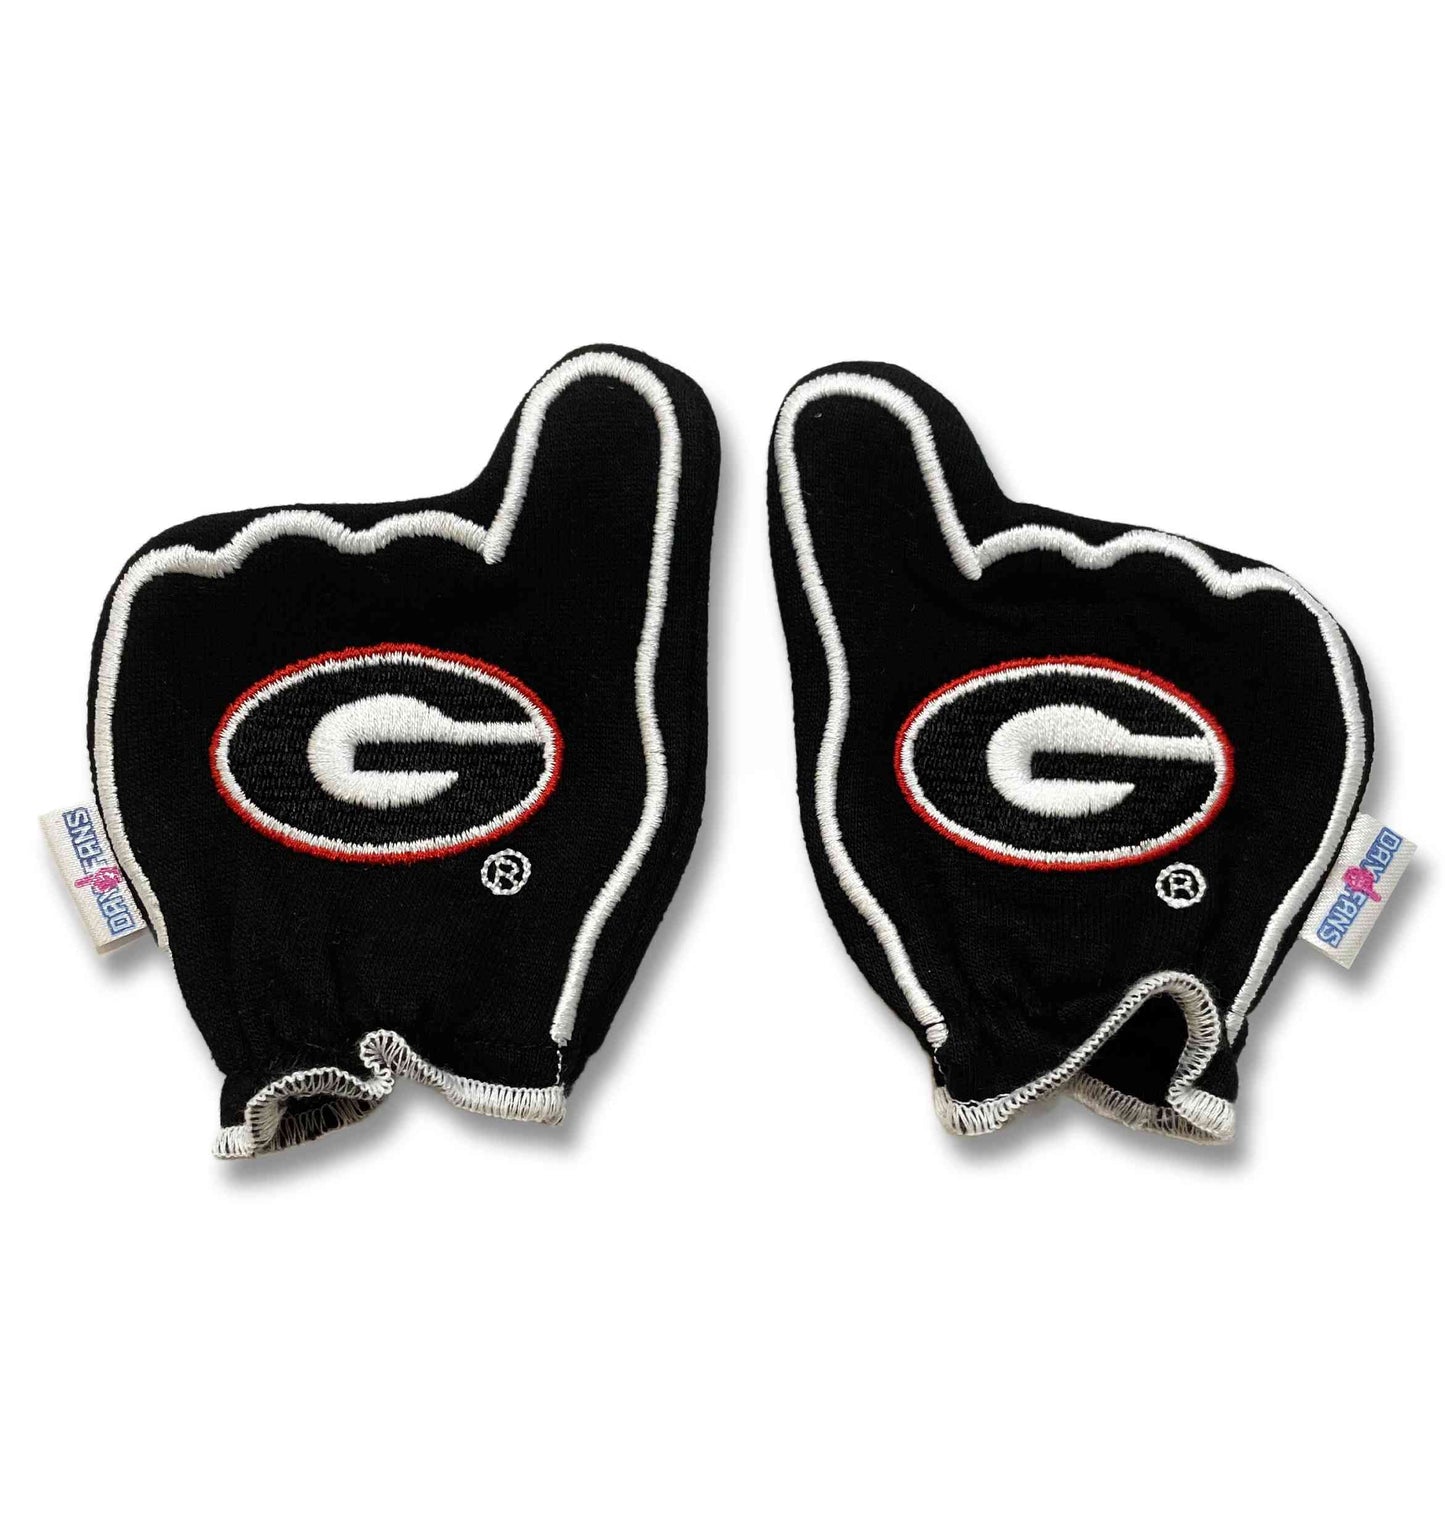 Georgia Go Dawgs FanMitts Baby Mittens Black Pair